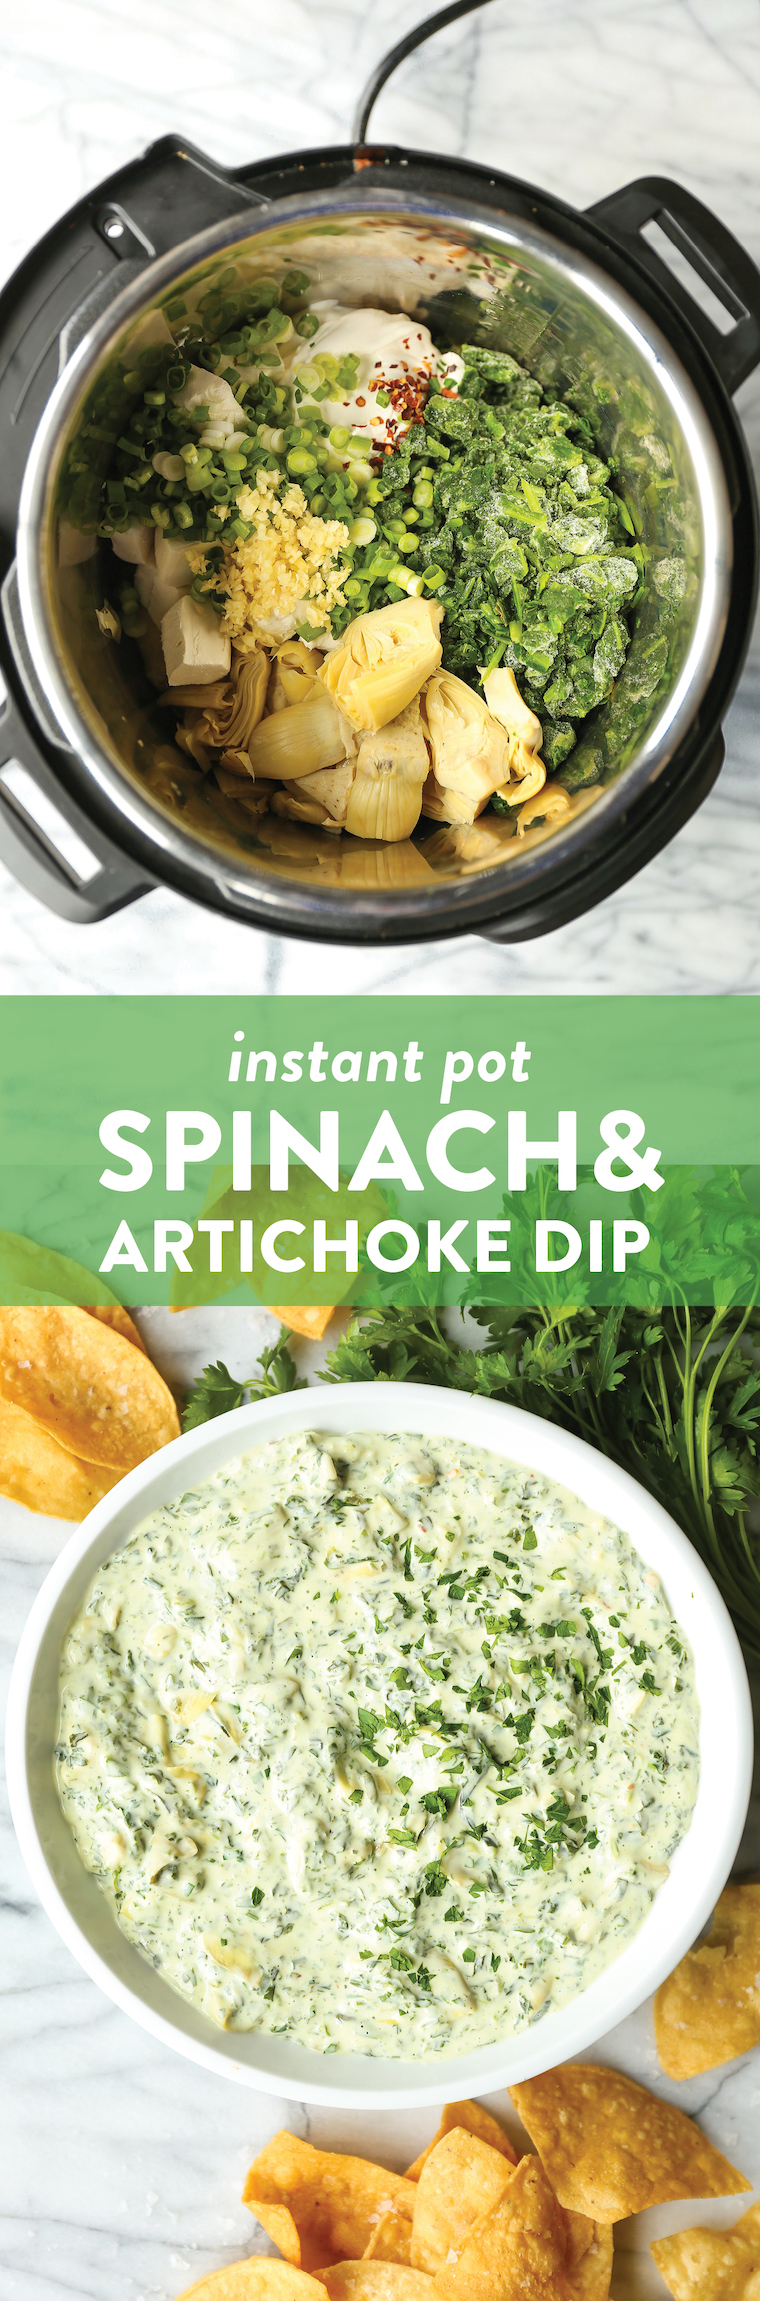 Instant Pot Spinach and Artichoke Dip - Seriously the EASIEST way to make this! Only 3 min in the IP using frozen spinach. No need to thaw and squeeze dry!